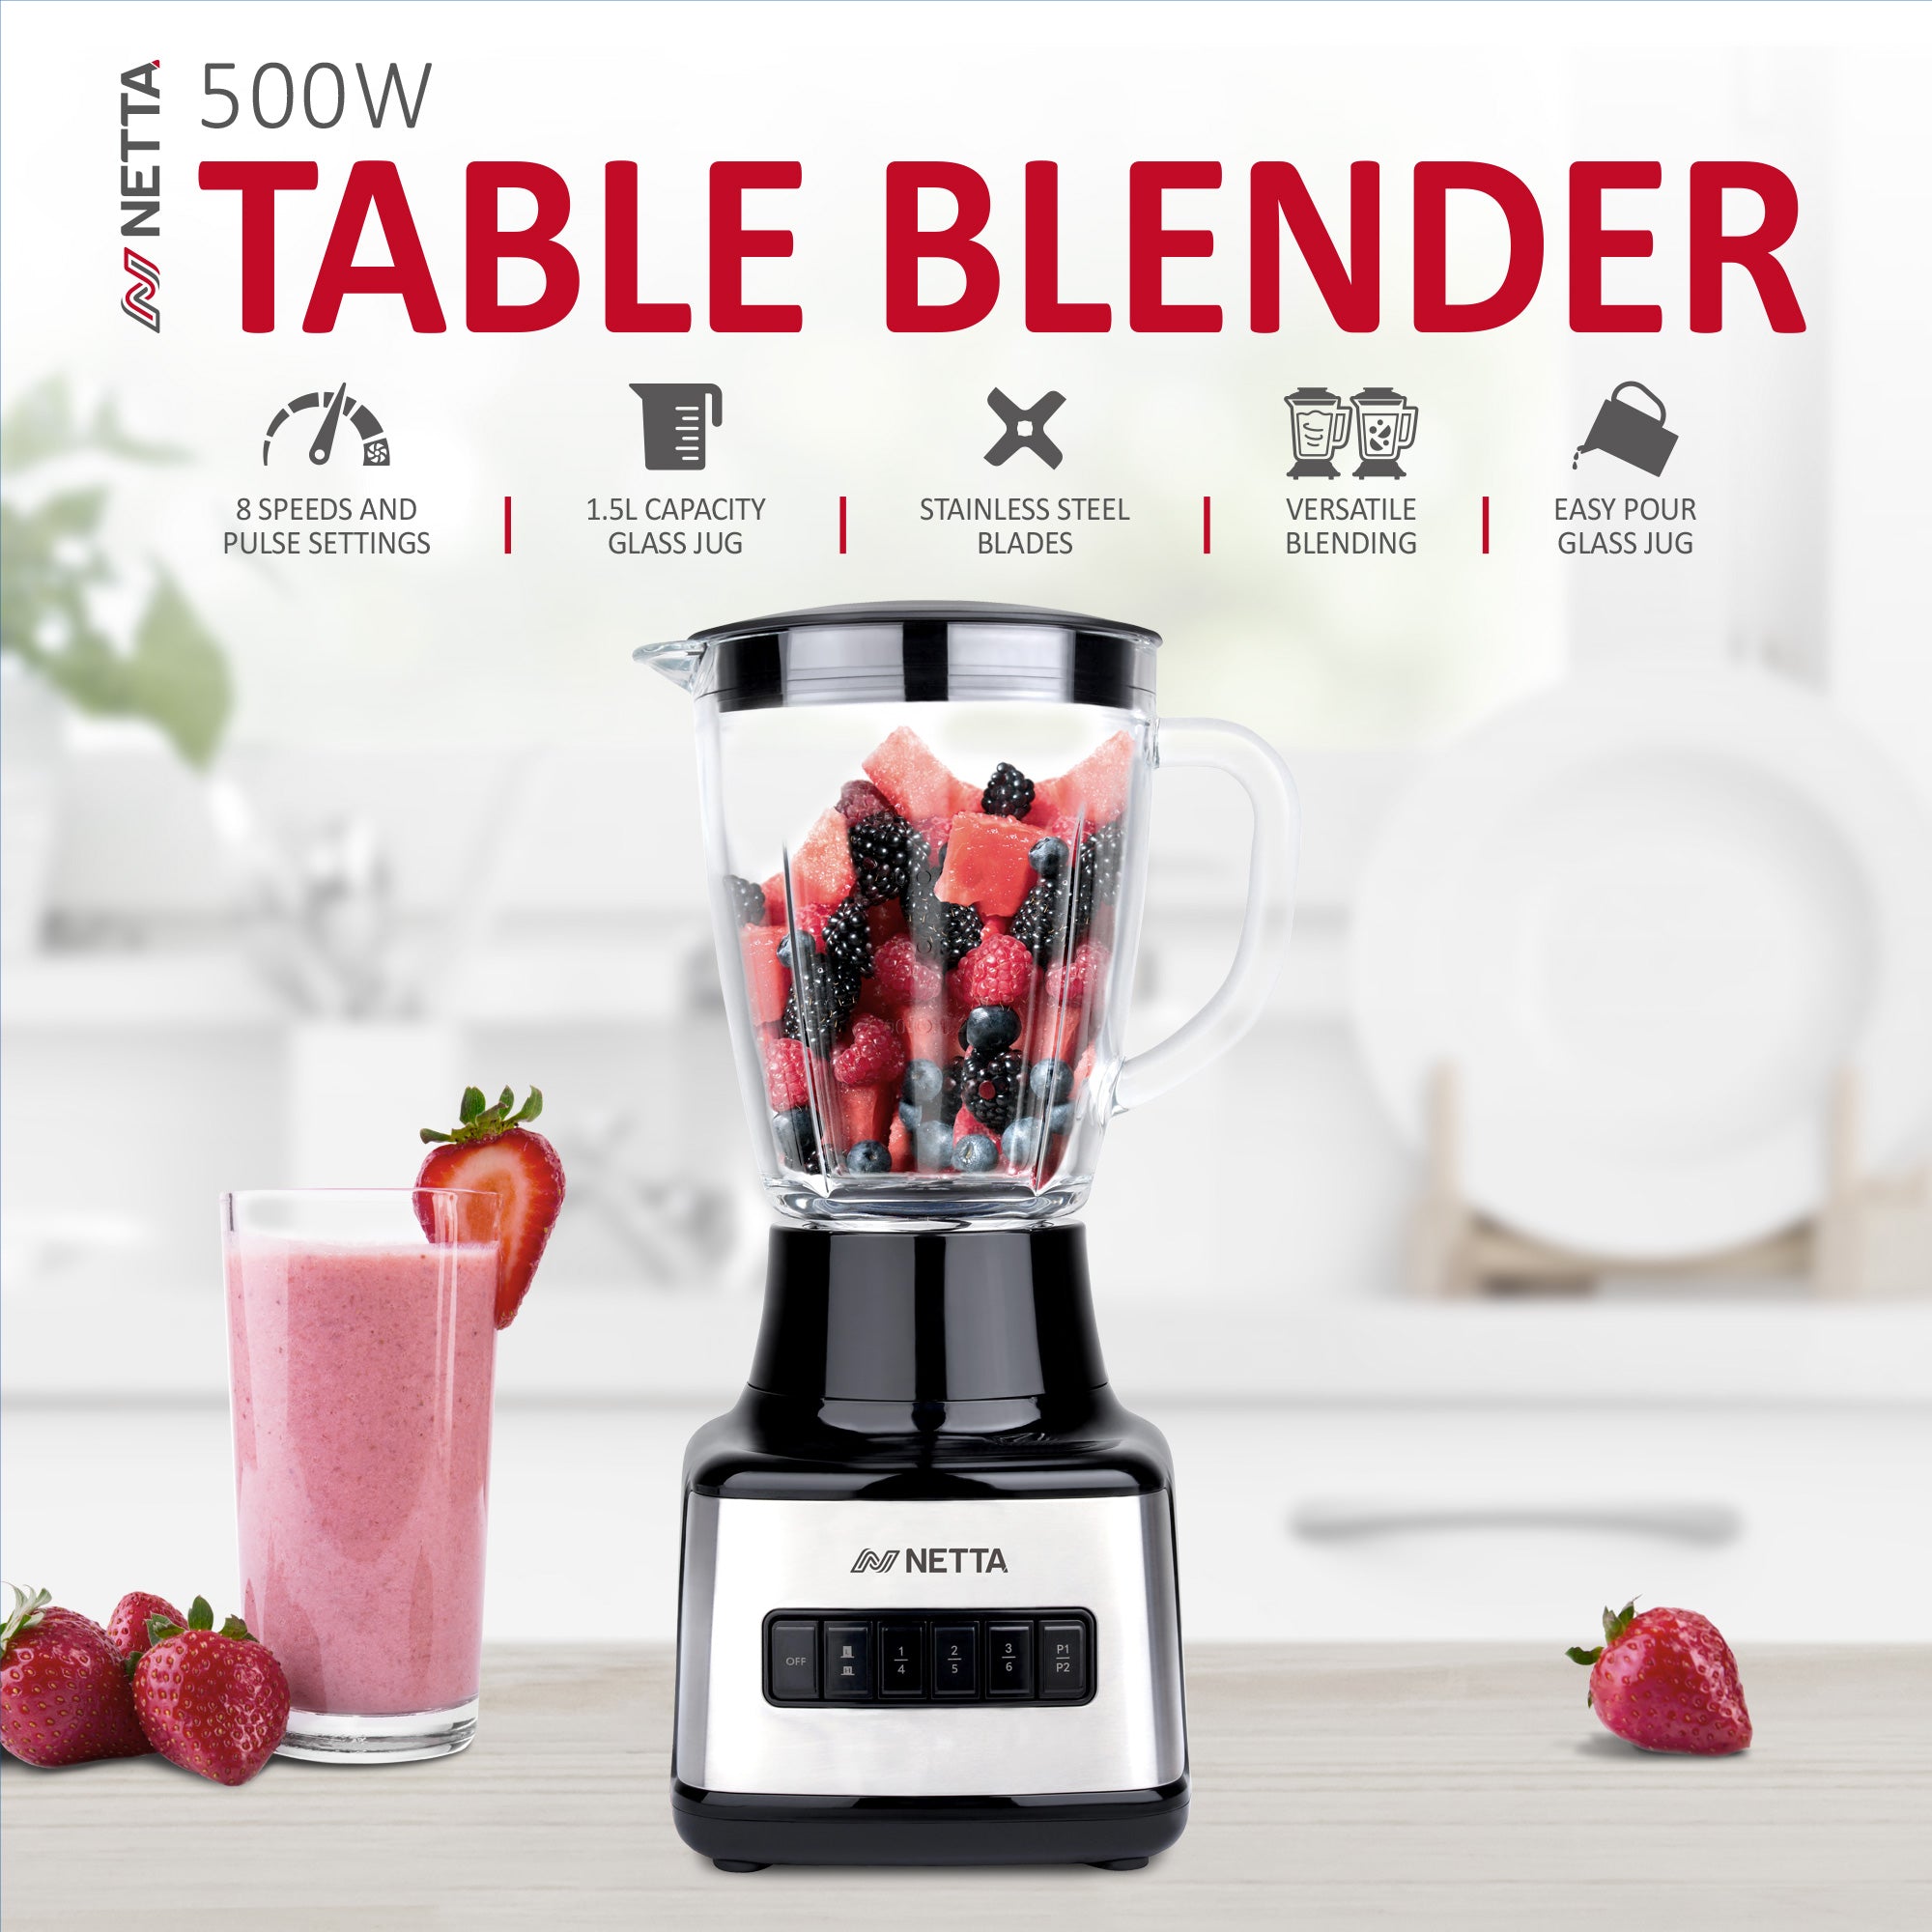 NETTA 8-Speed Table Blender with 1.5L Glass Jug